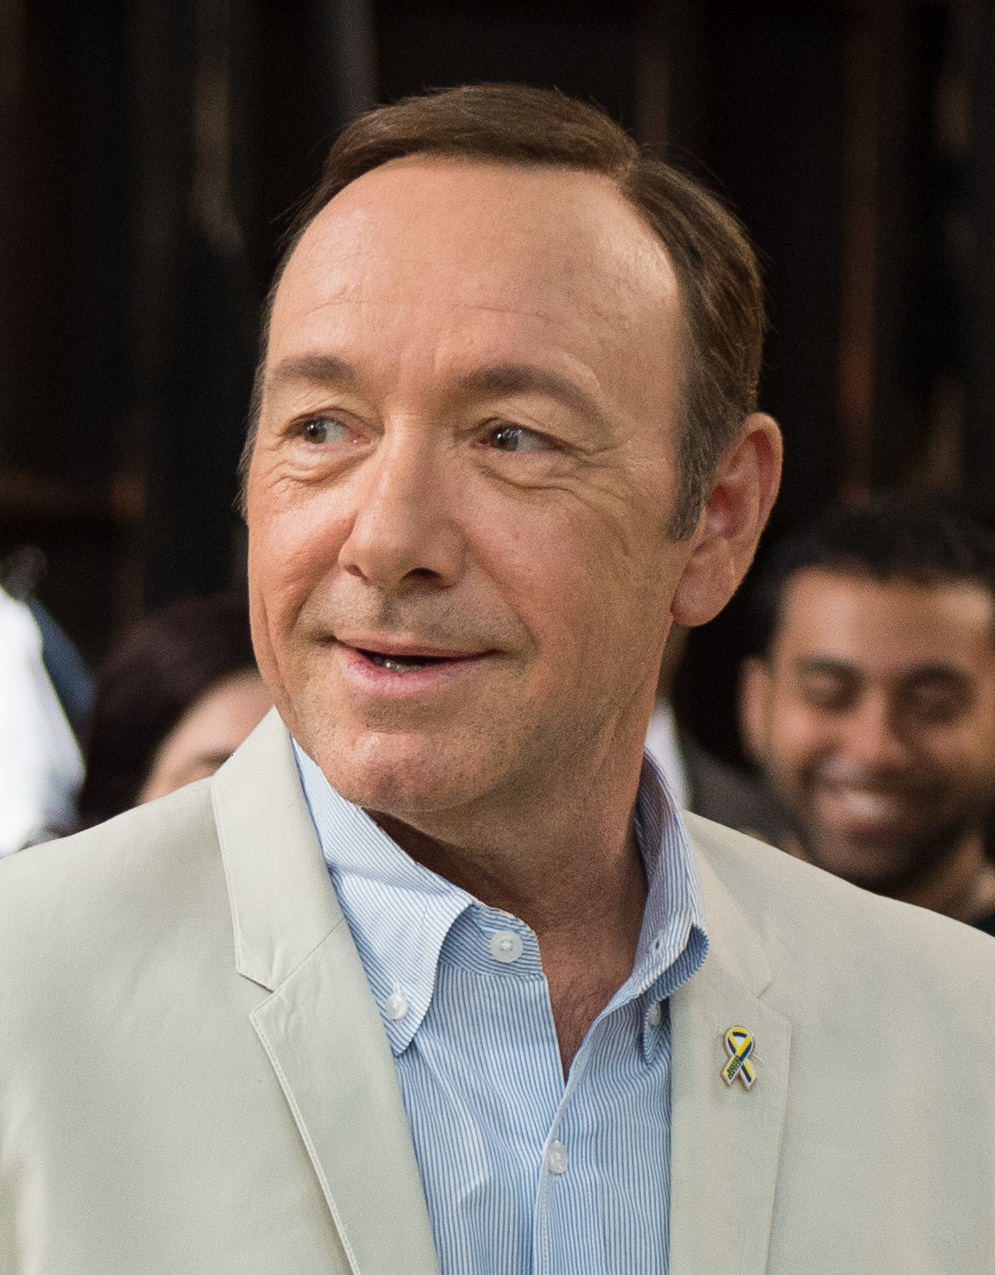 Kevin_Spacey,_May_2013 credit Maryland GovPics culture du viol